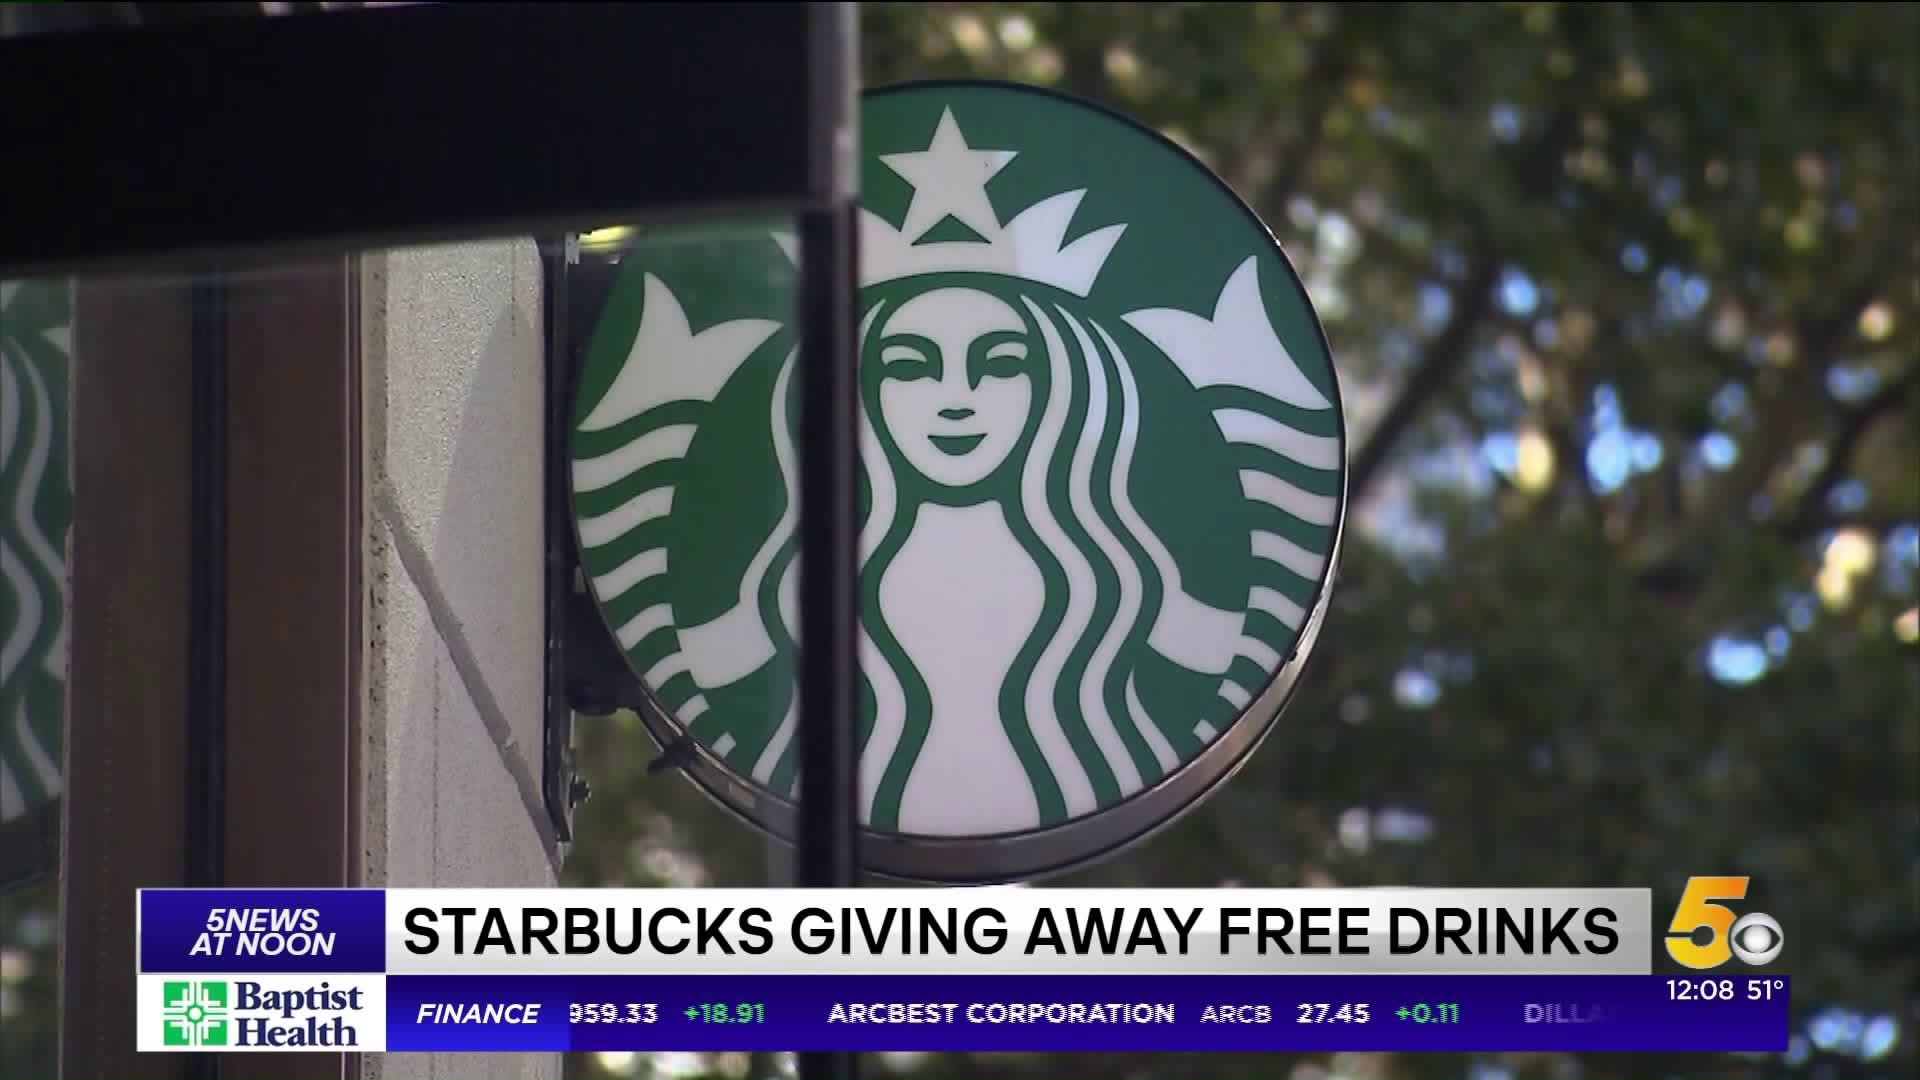 At Starbucks Pop-Up Parties, Over 1,000 Locations Will Give Away Free Drinks Until The New Year